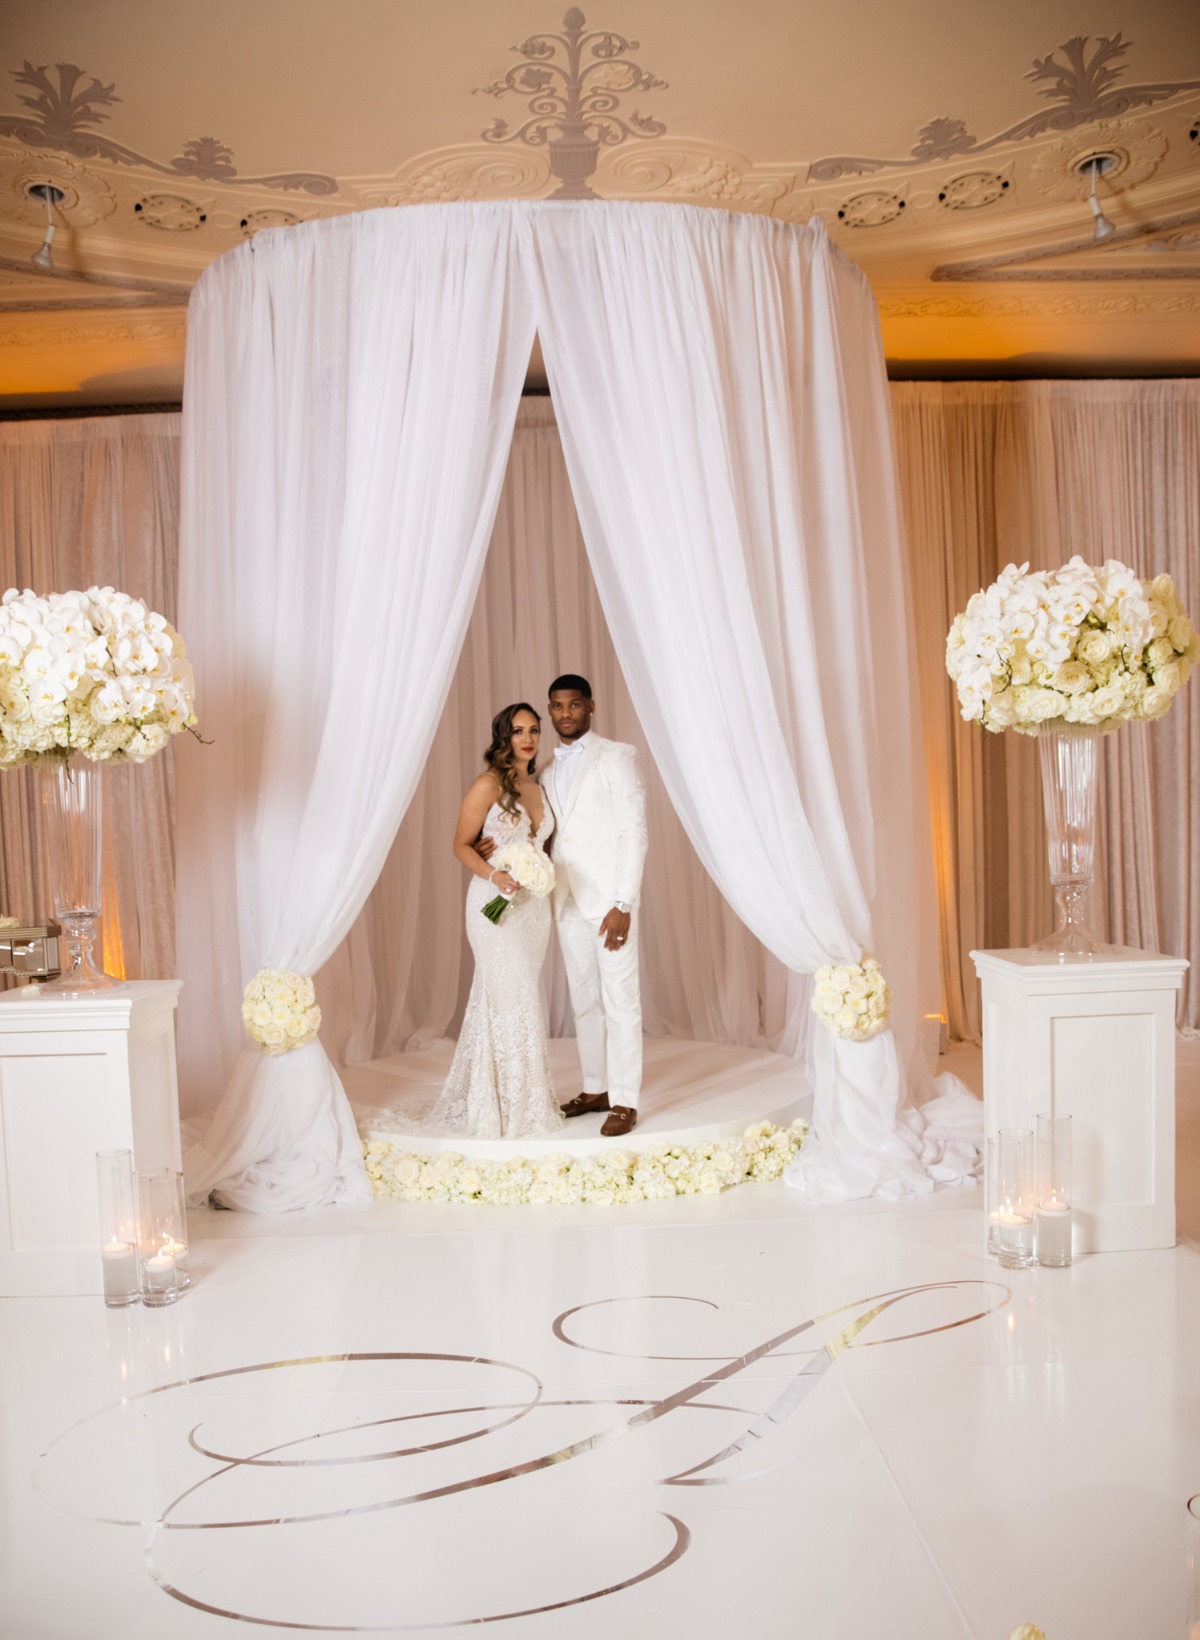 A dreamy all-white intimate wedding